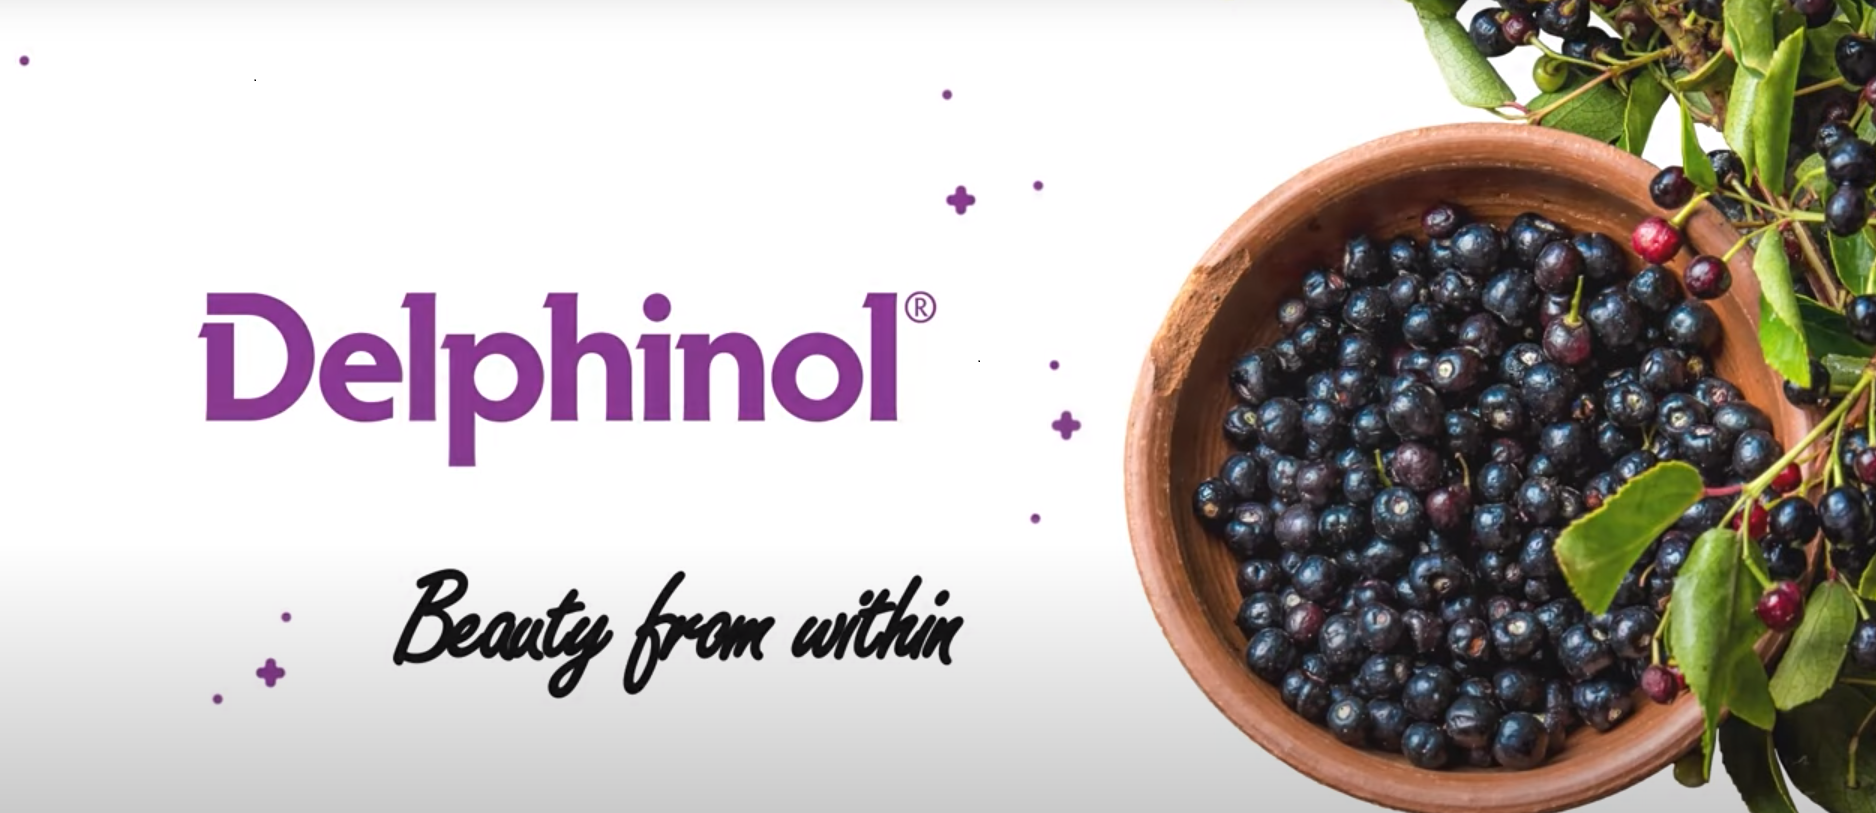 Delphinol® - the unique ingredient for beauty from within products